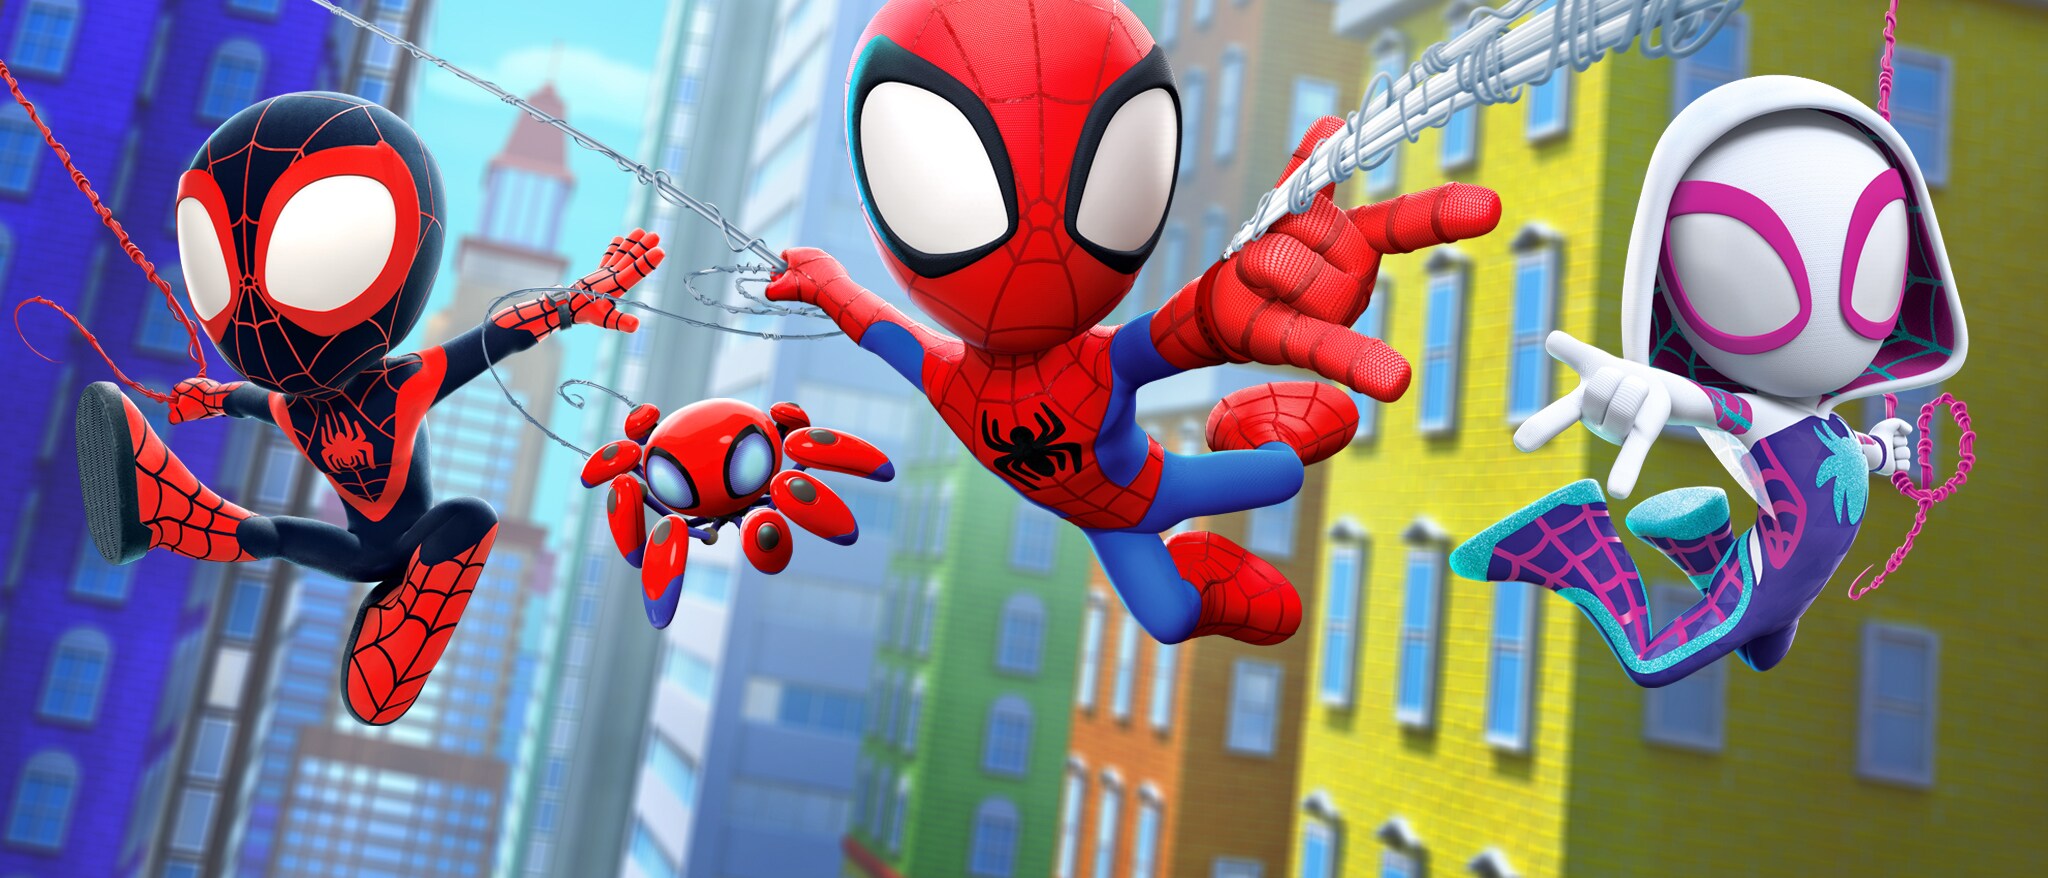 Marvel's Spidey and his Amazing Friends - Featured Content Banner